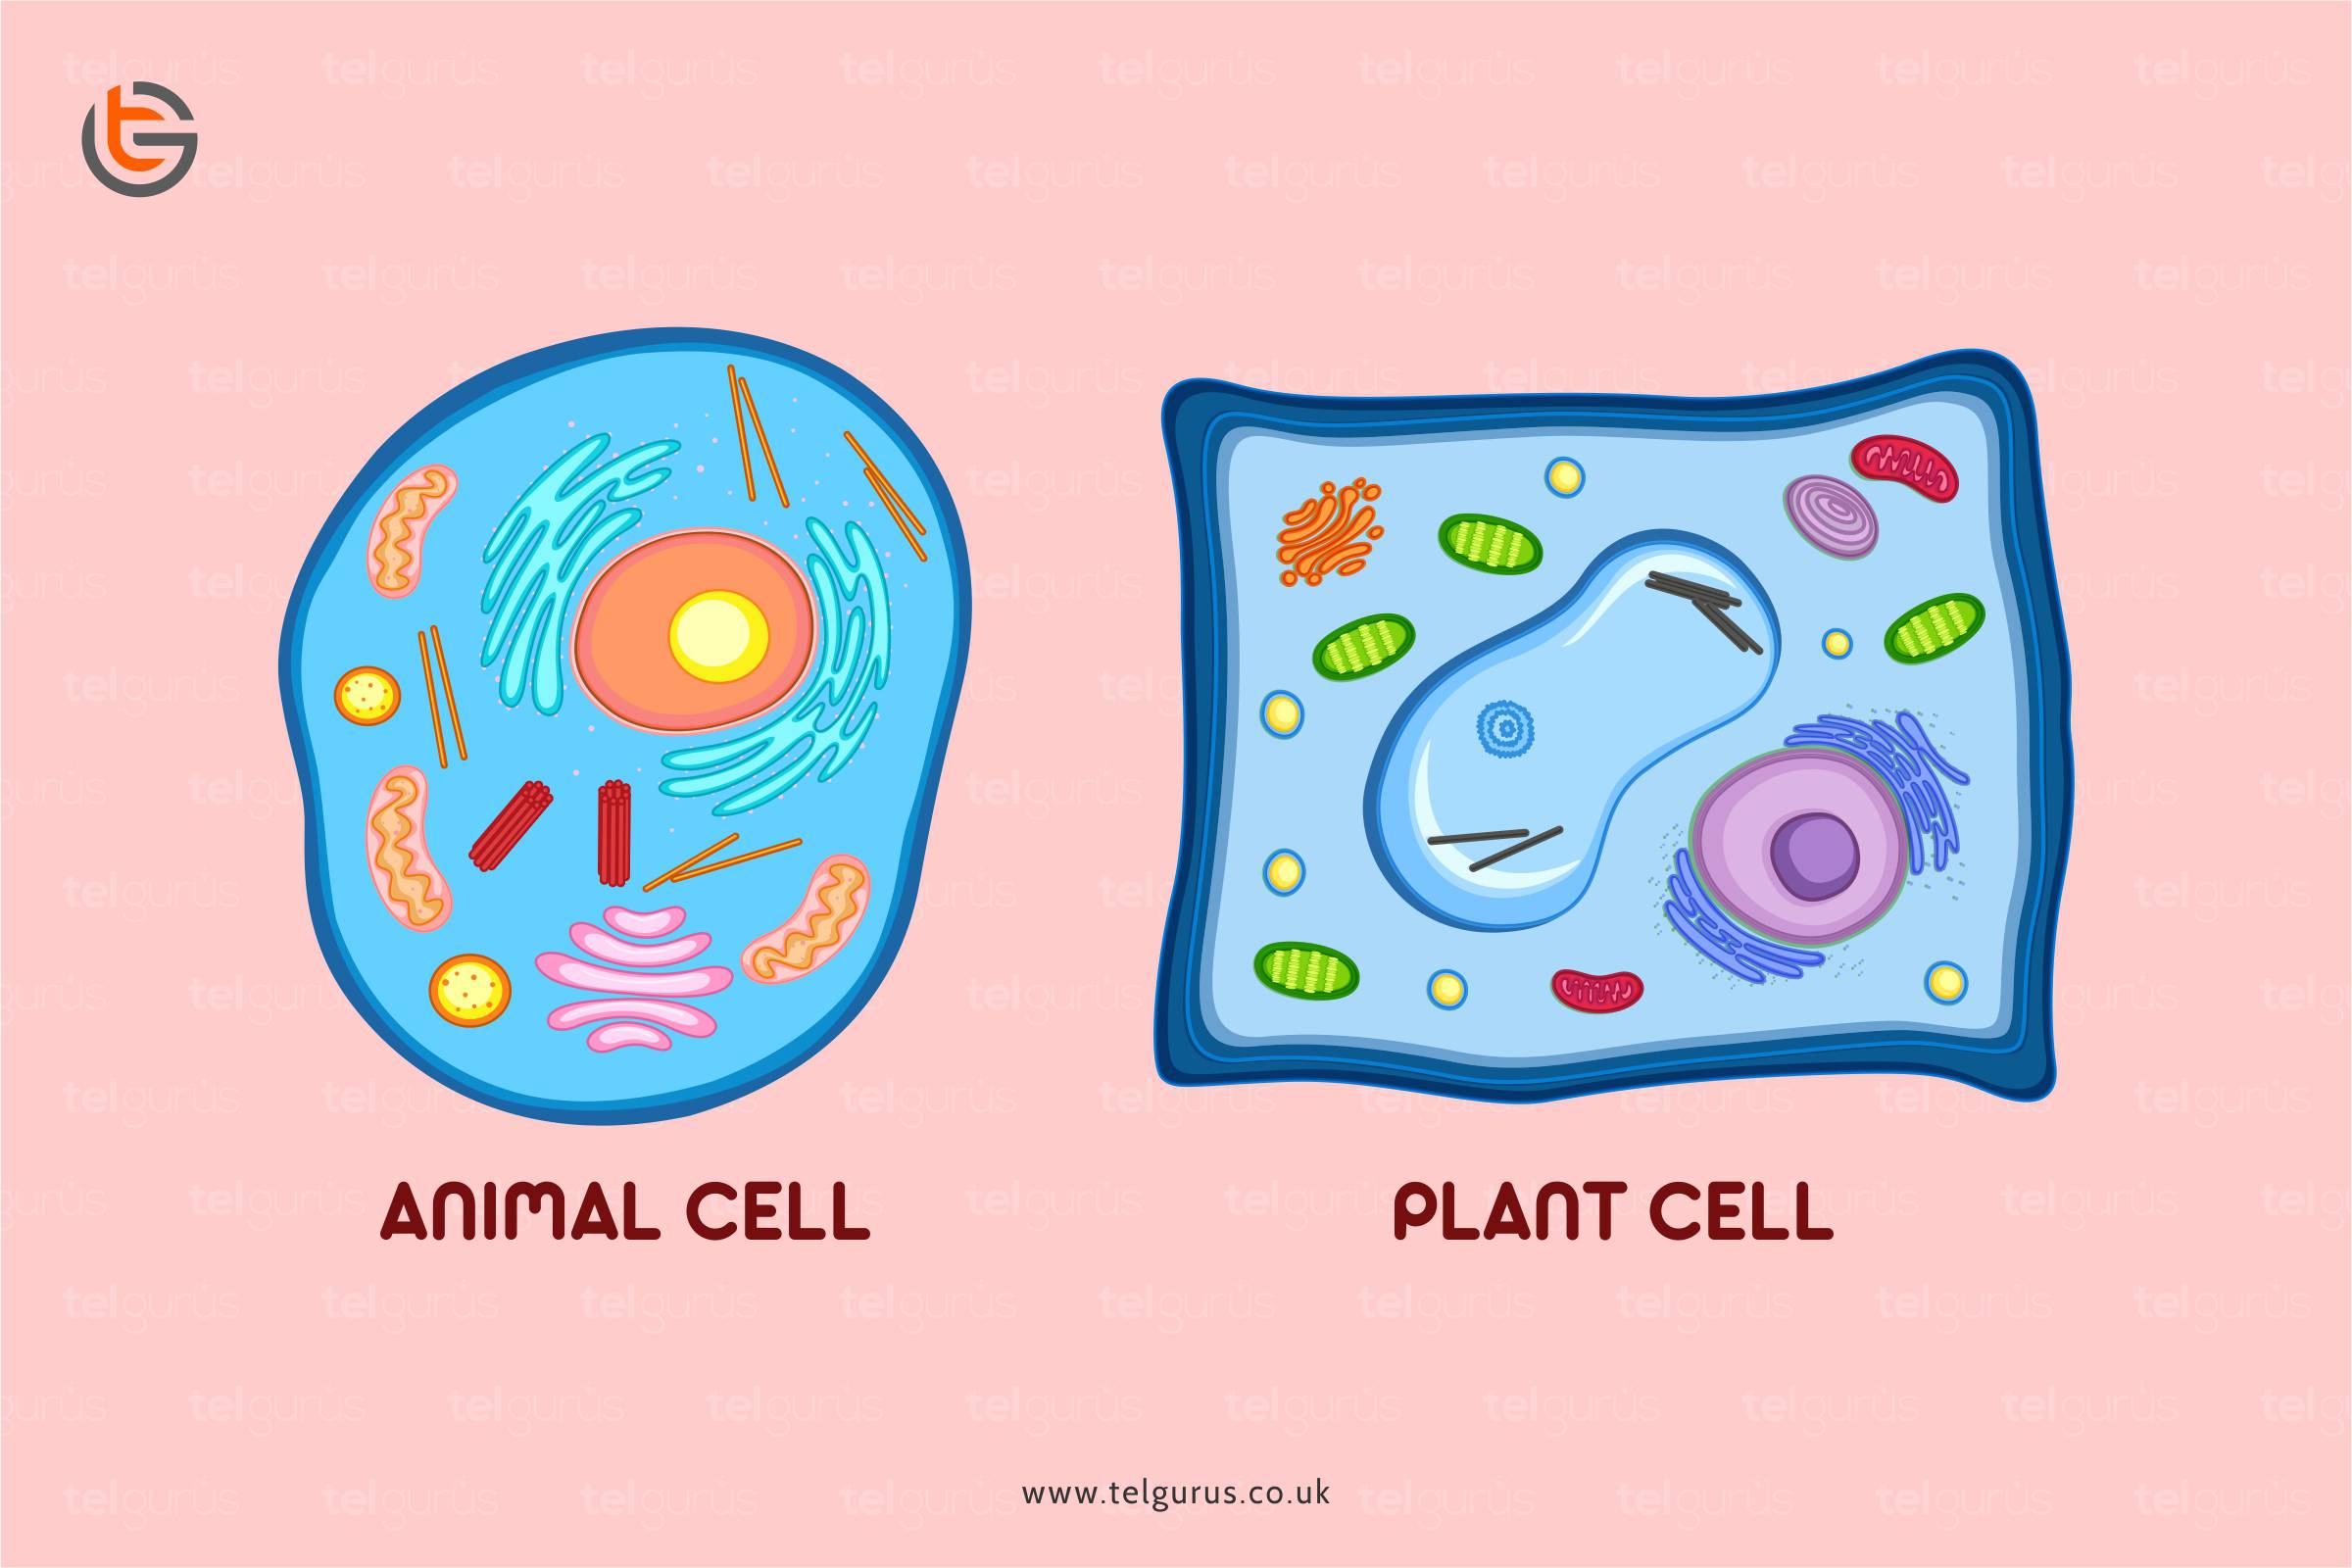 What organelles can be found in plant cell but not in animal cell?